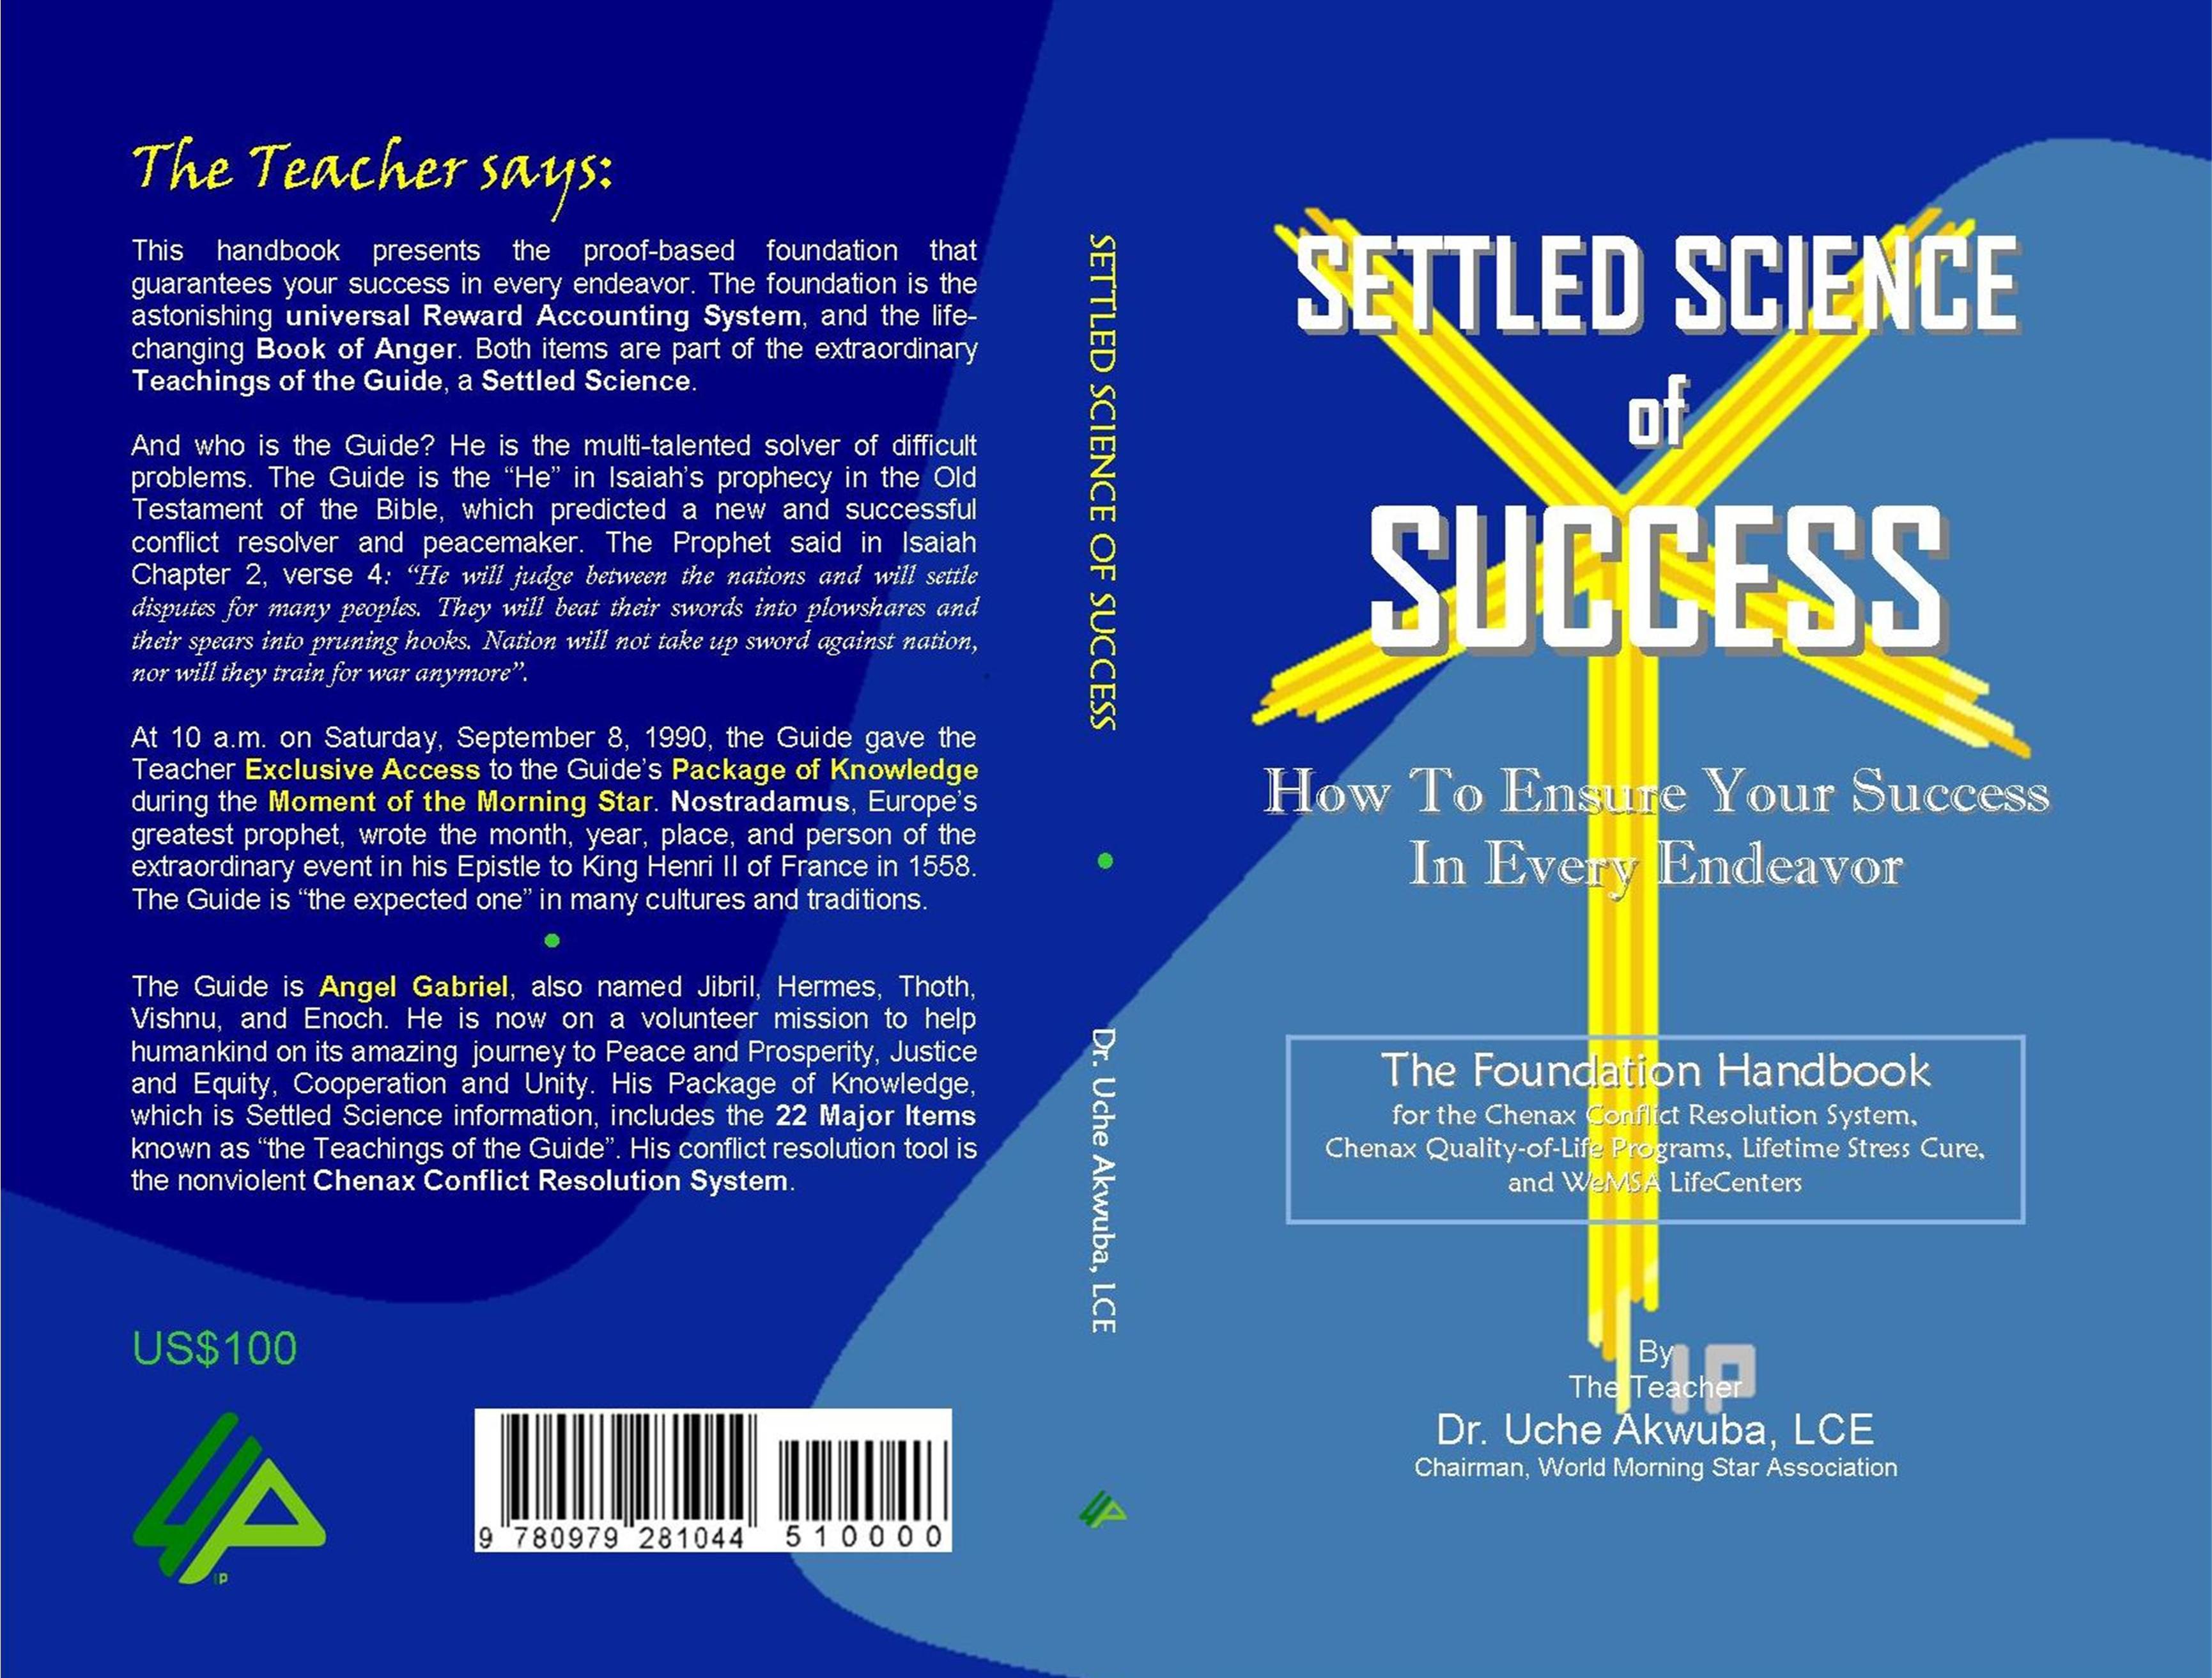 SETTLED SCIENCE OF SUCCESS cover image